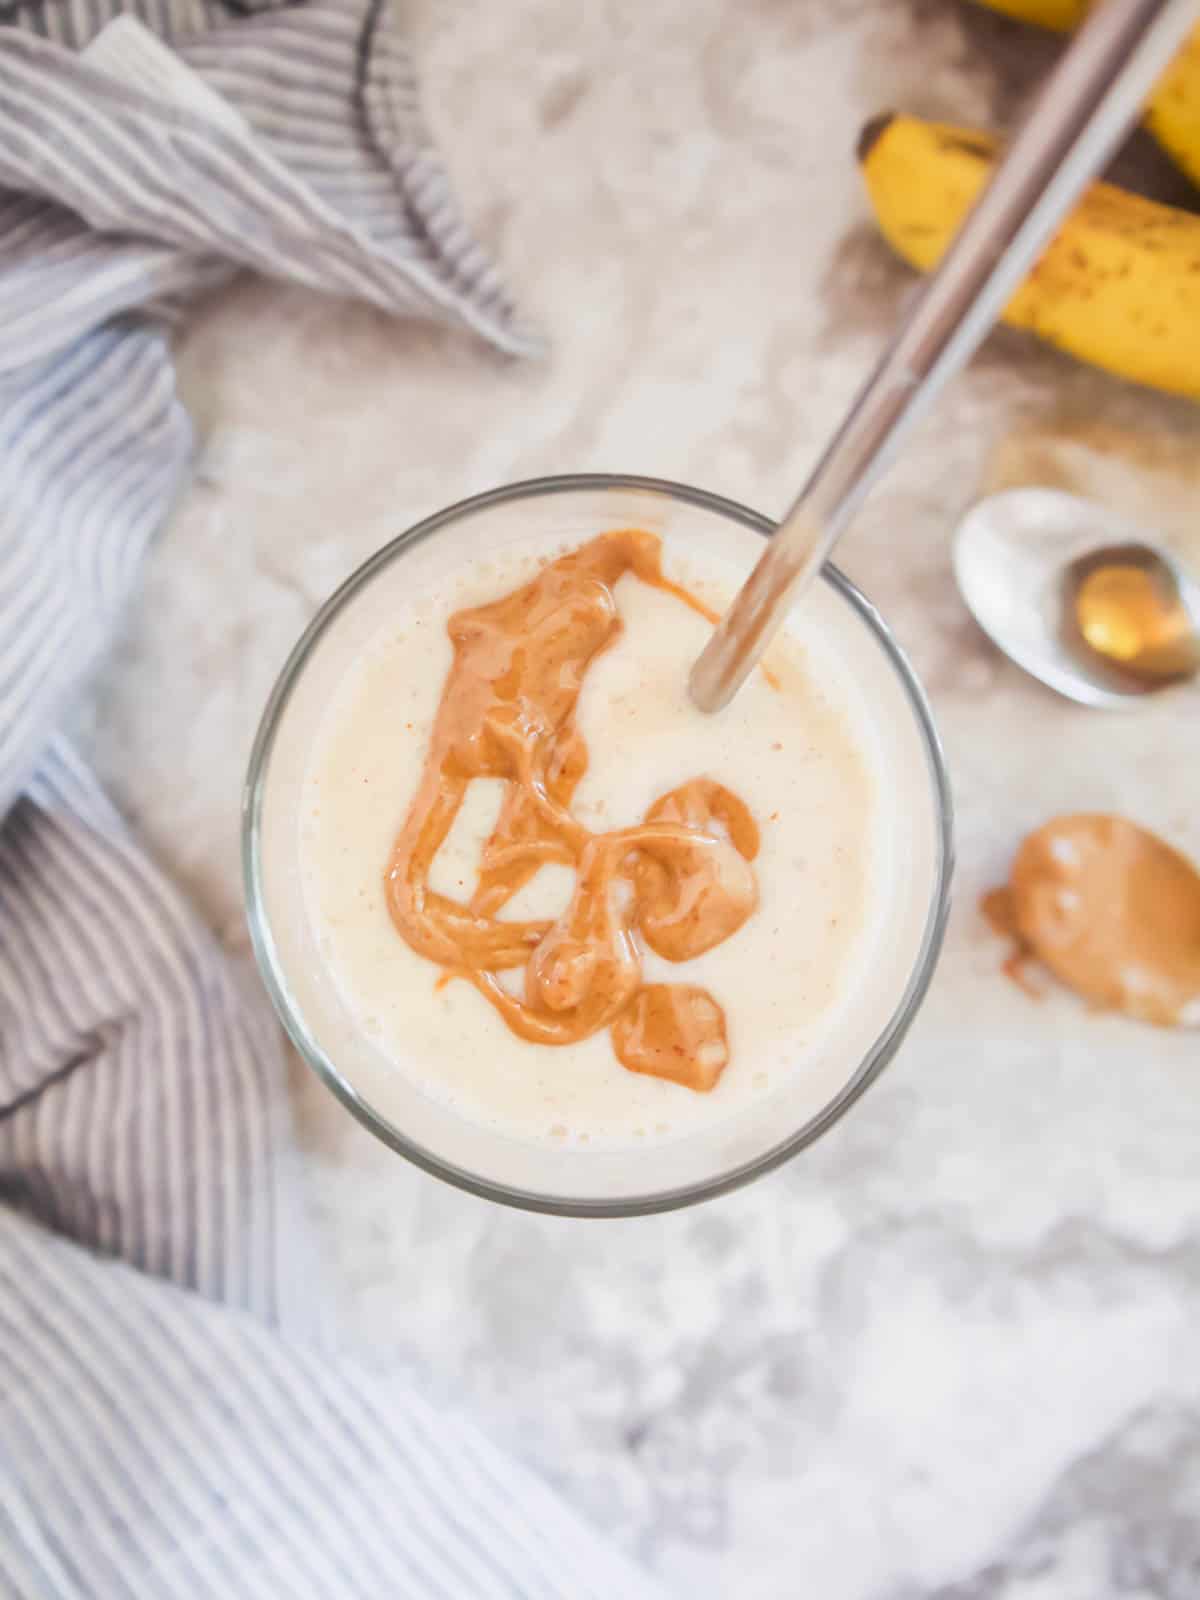 Maple syrup smoothie with almond butter drizzled on top.